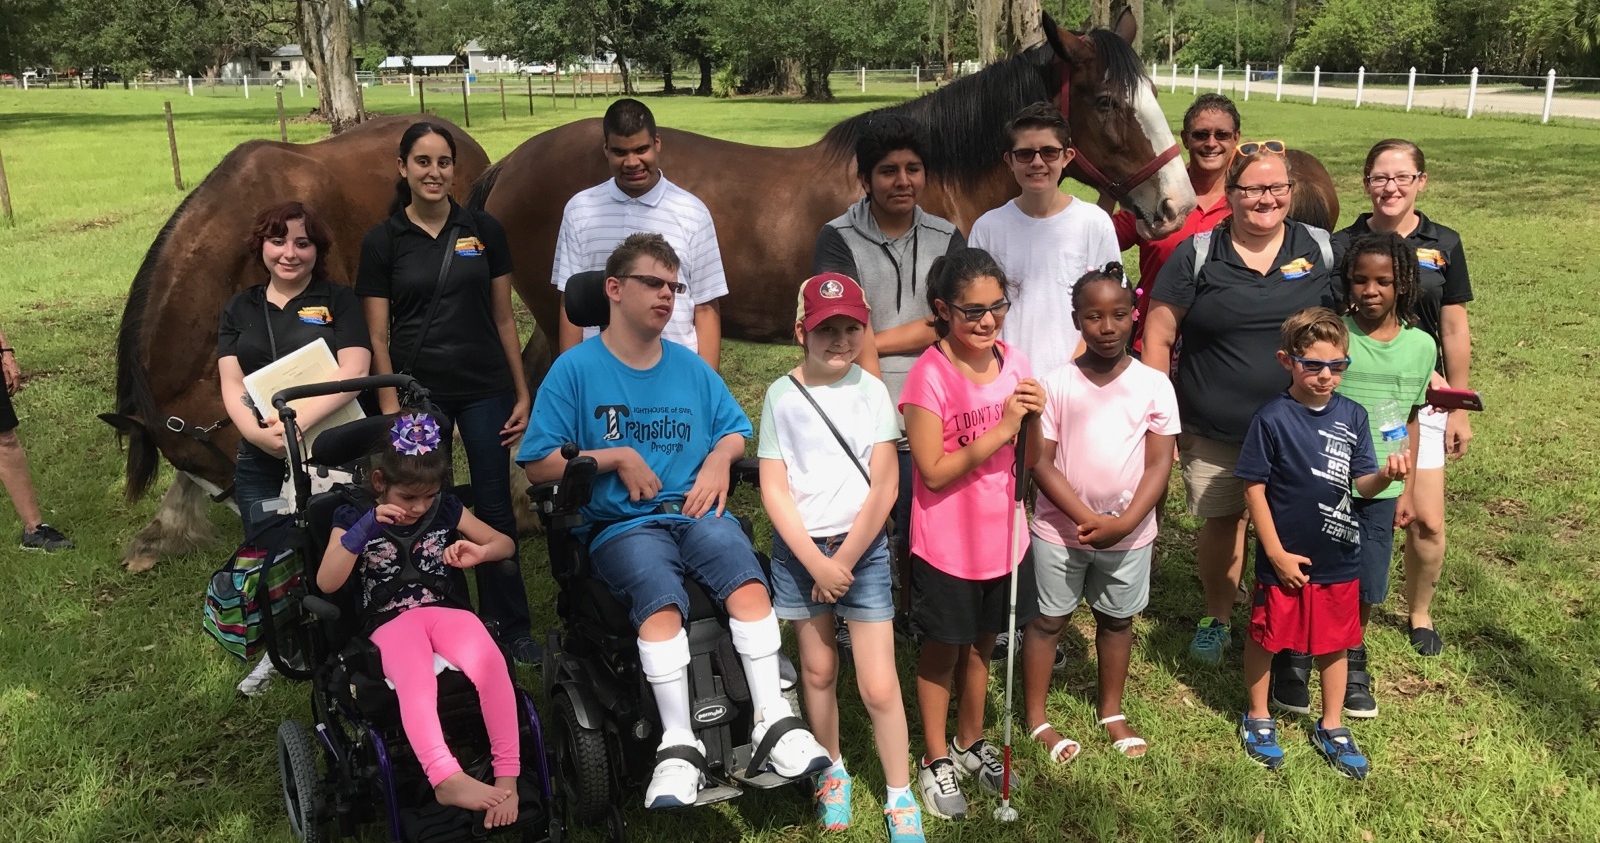 Summer campers and staff standing front of two horses.